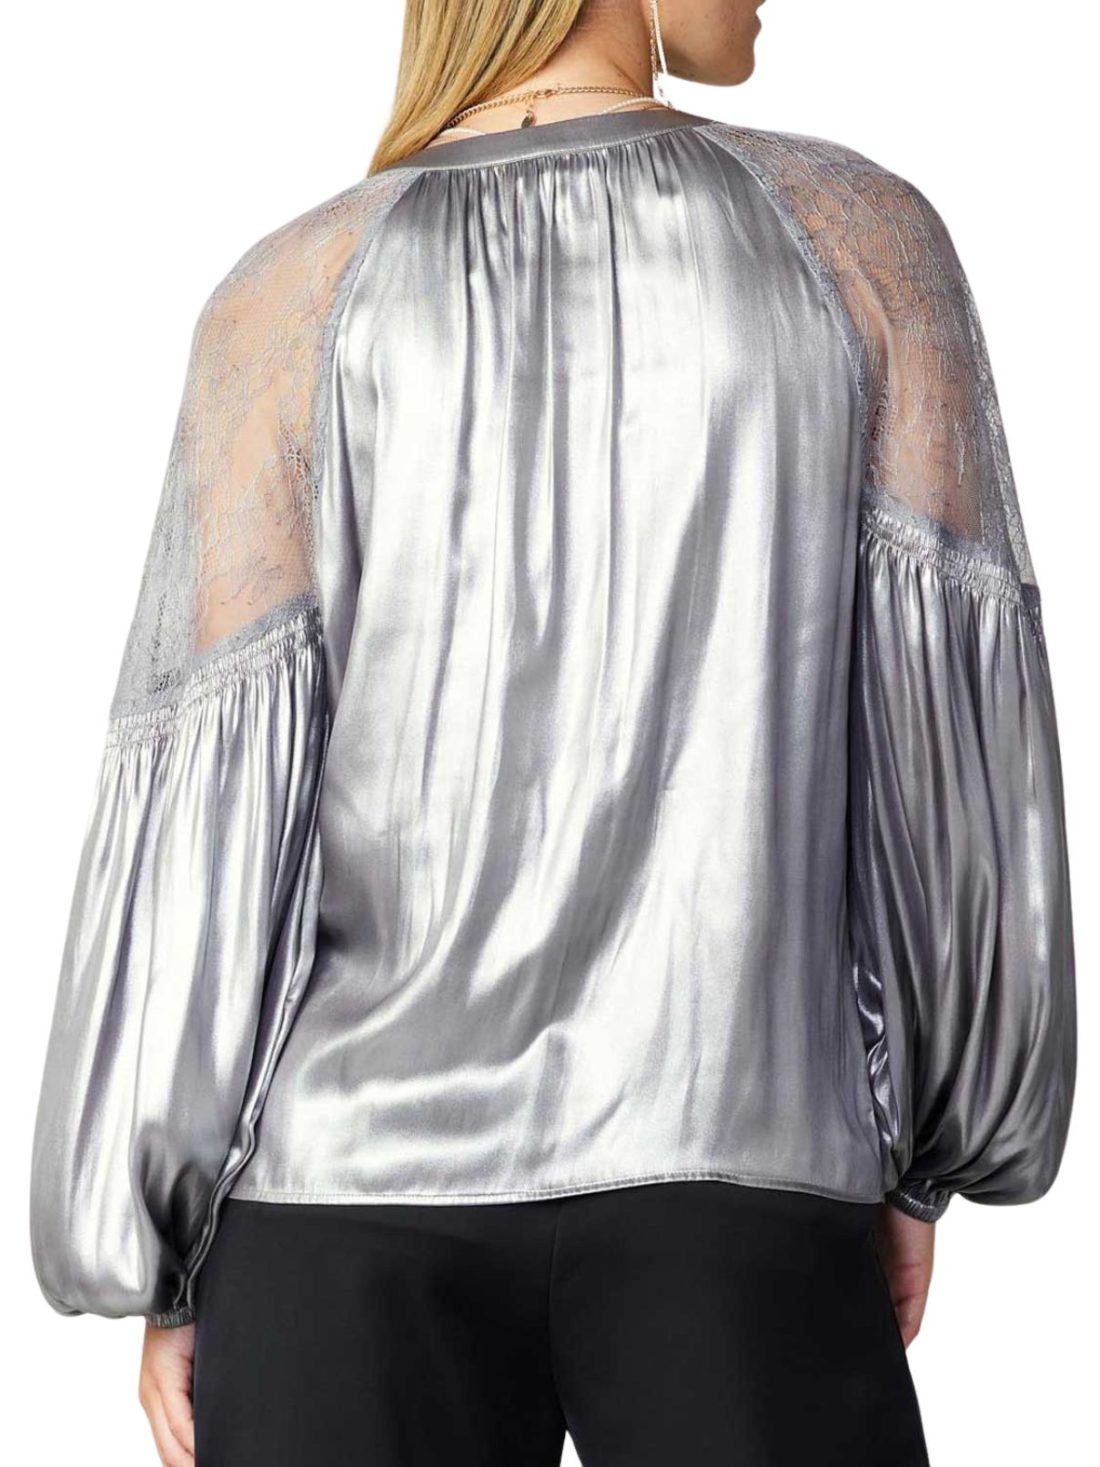 current air split neck blouse in silver